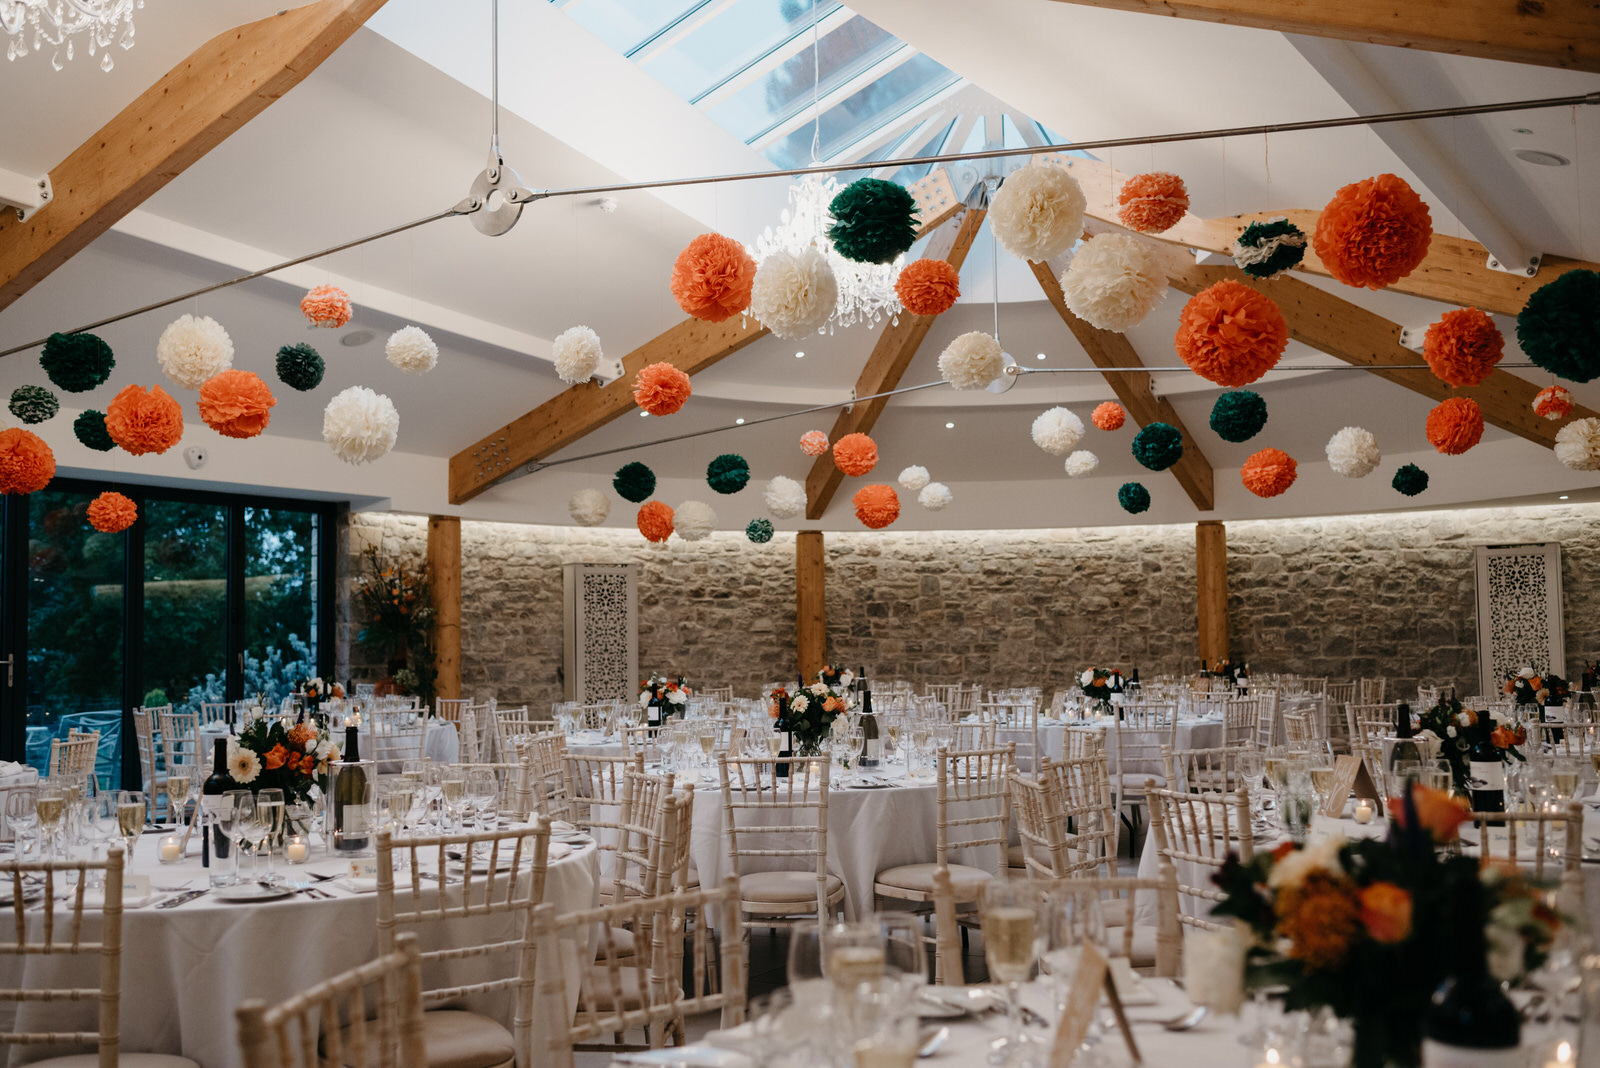 The Best Wedding Venues In South Wales